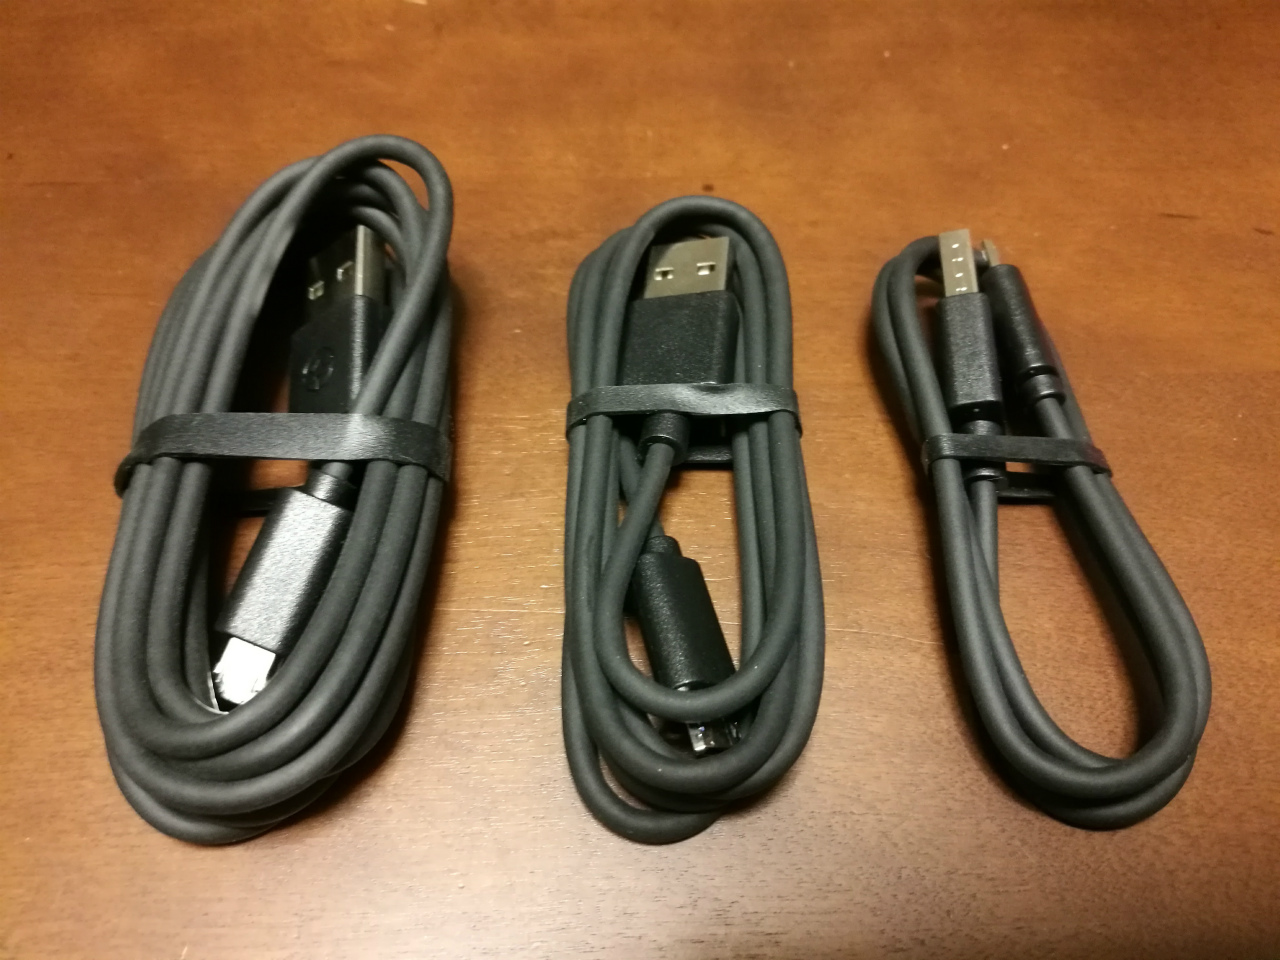 pr-aboat-microusb-cable-03